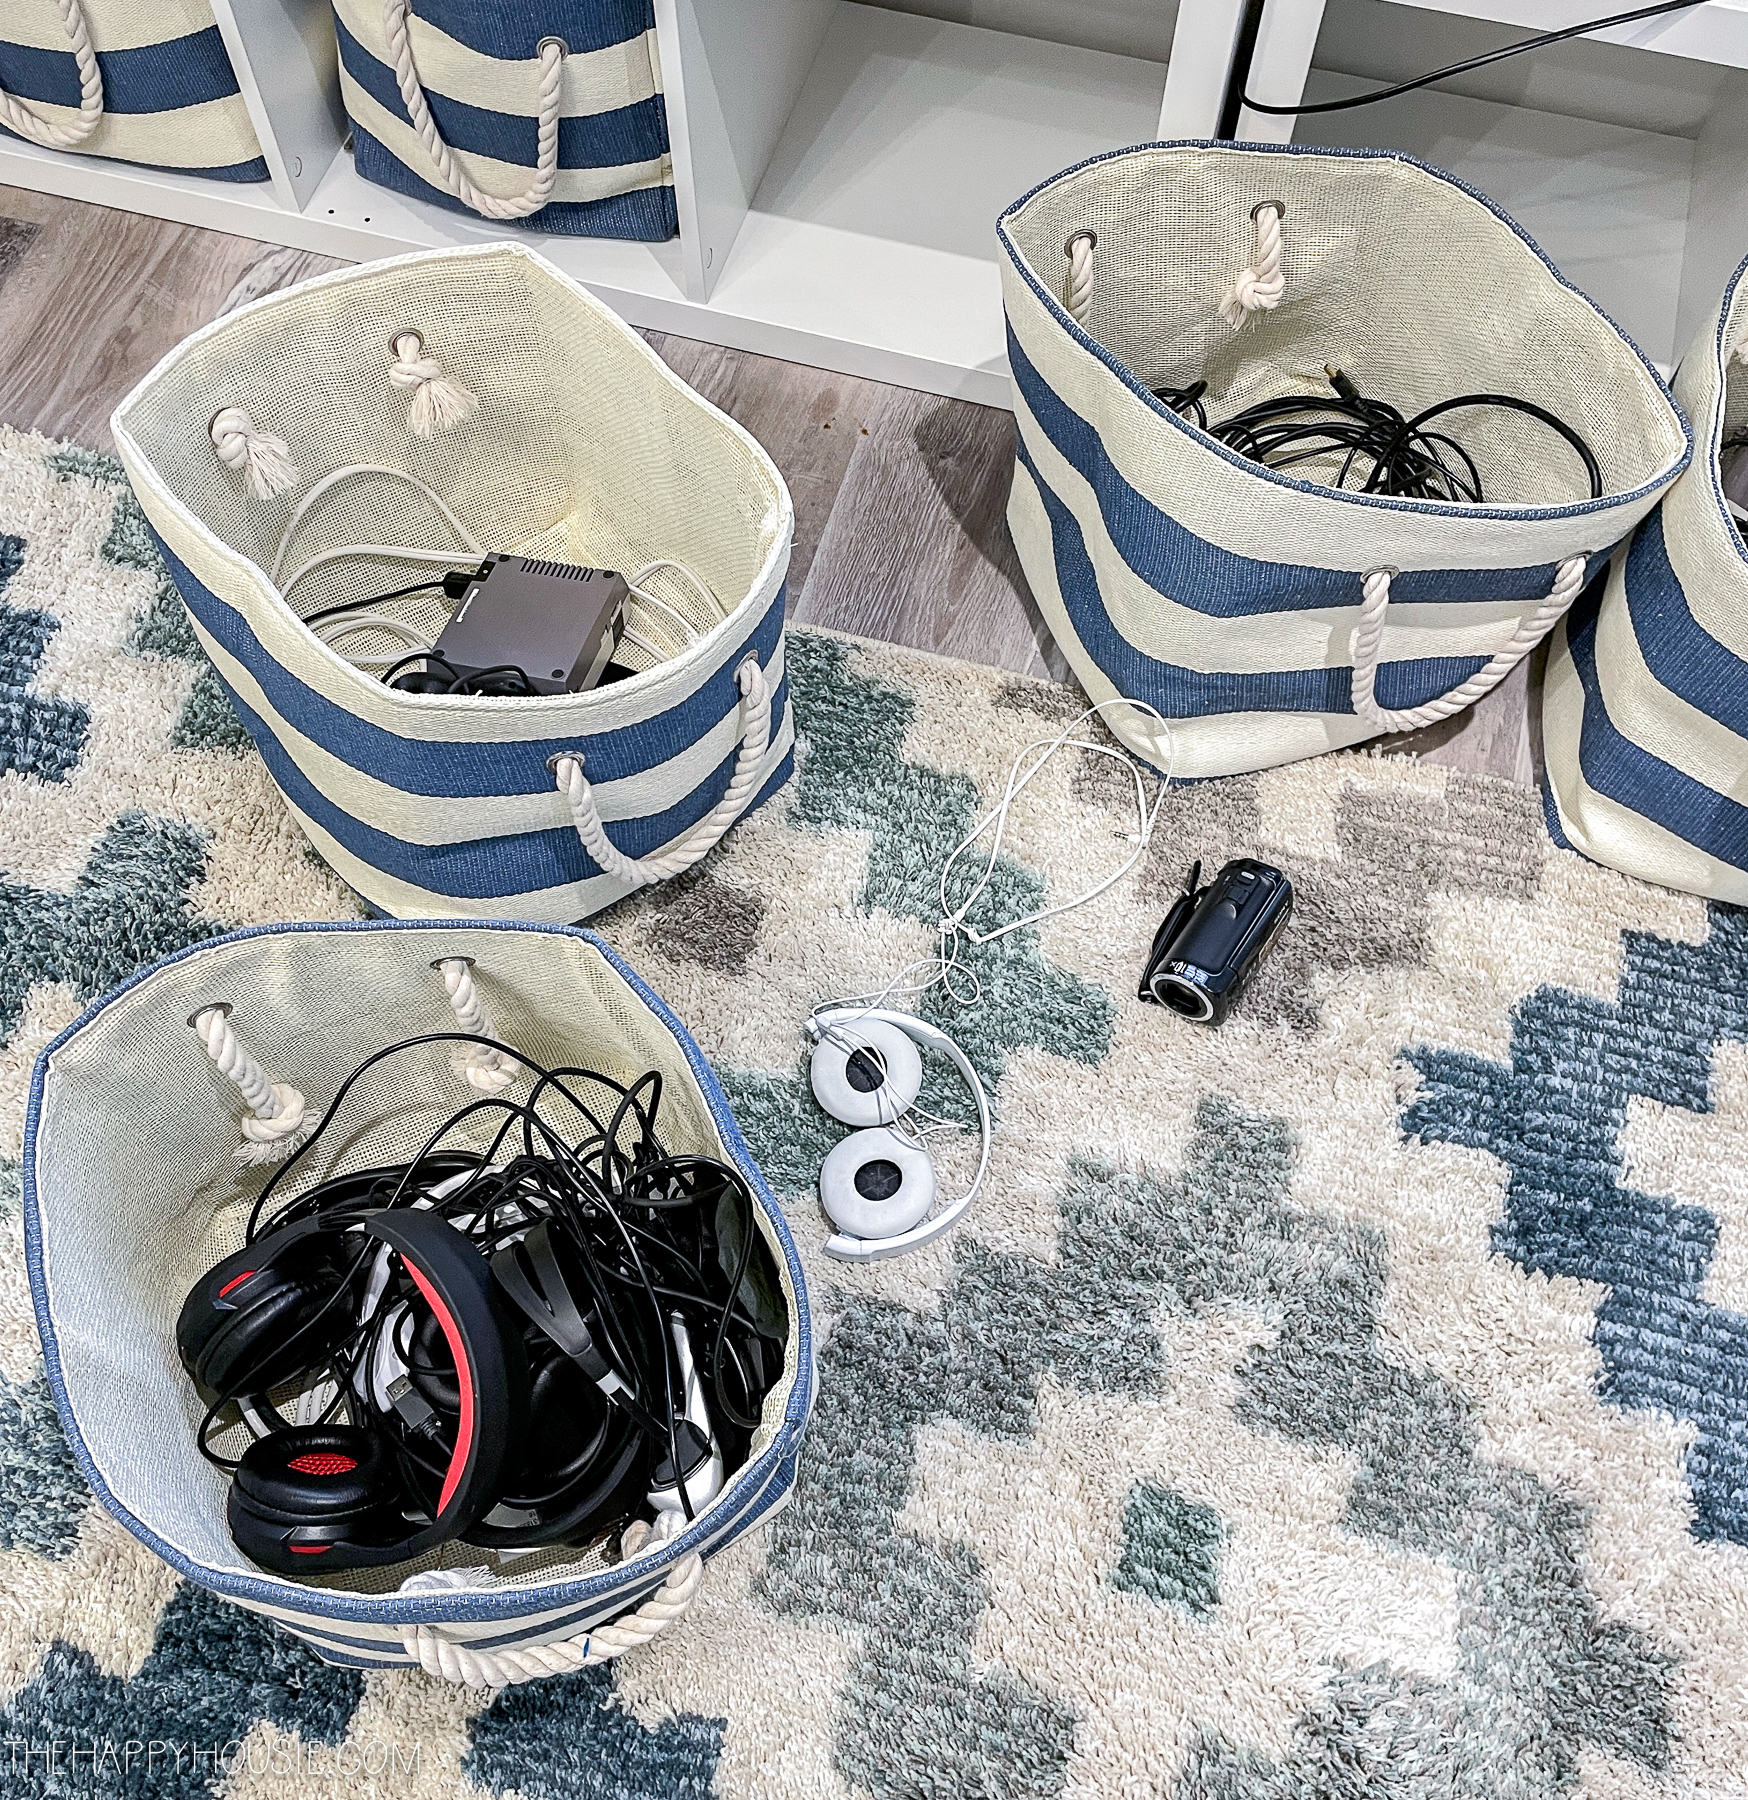 bins used to store electronic items in a playroom family room